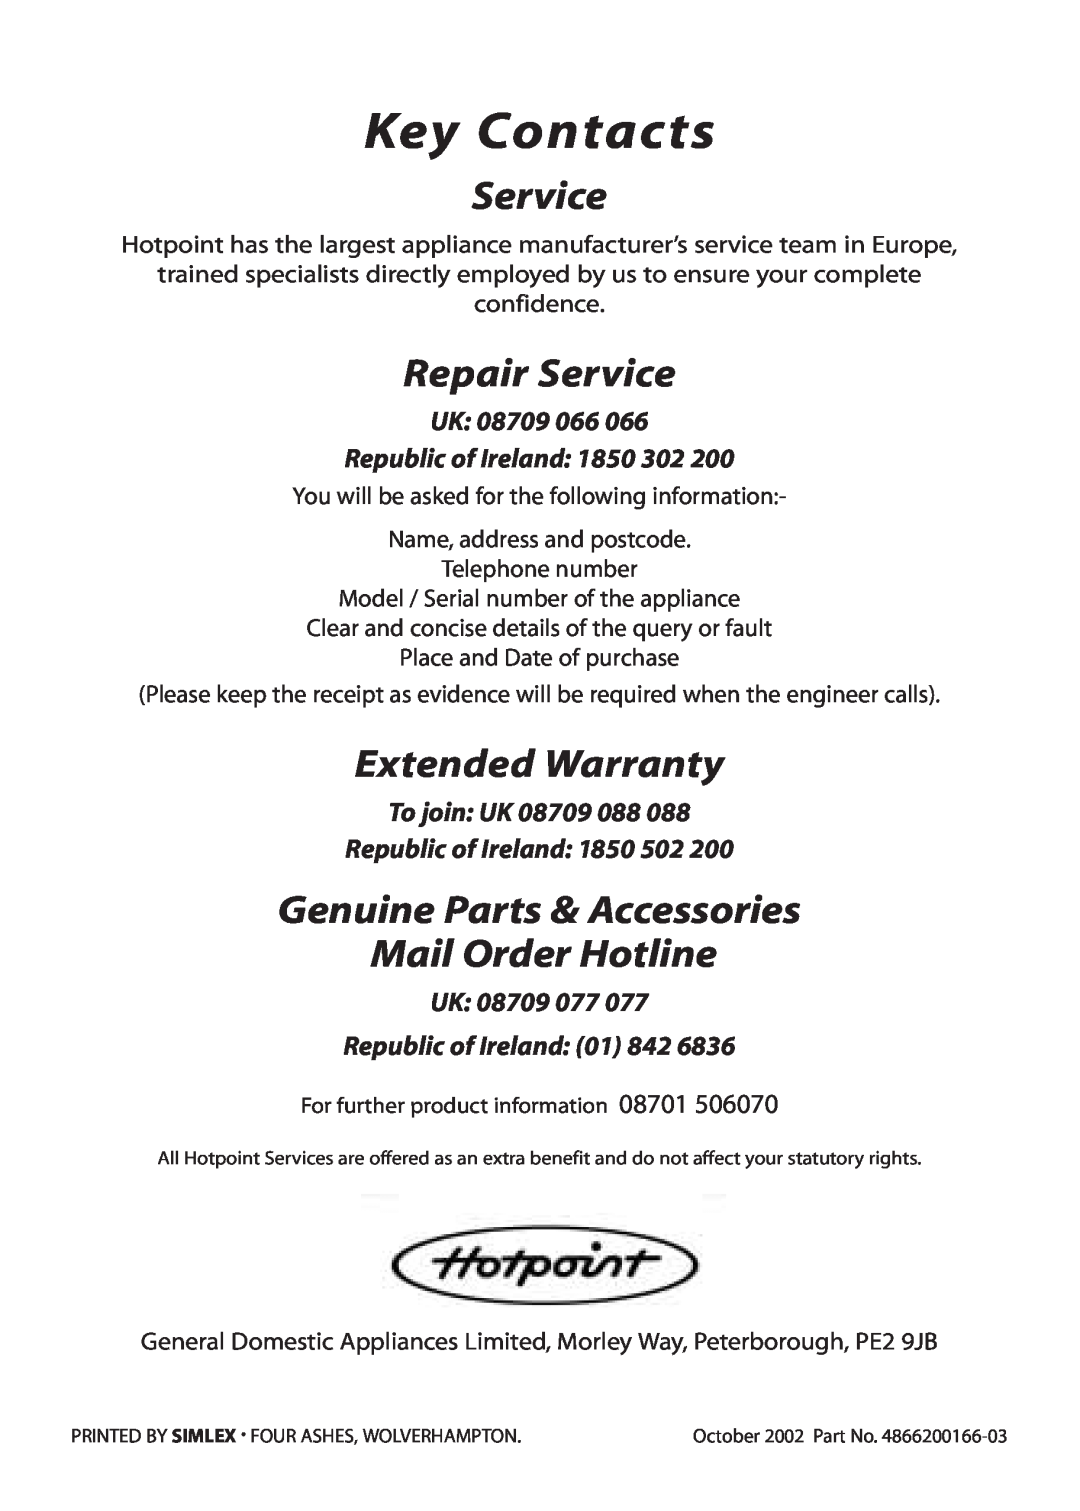 Hotpoint BS72, BS62 Key Contacts, Repair Service, Extended Warranty, Genuine Parts & Accessories Mail Order Hotline 